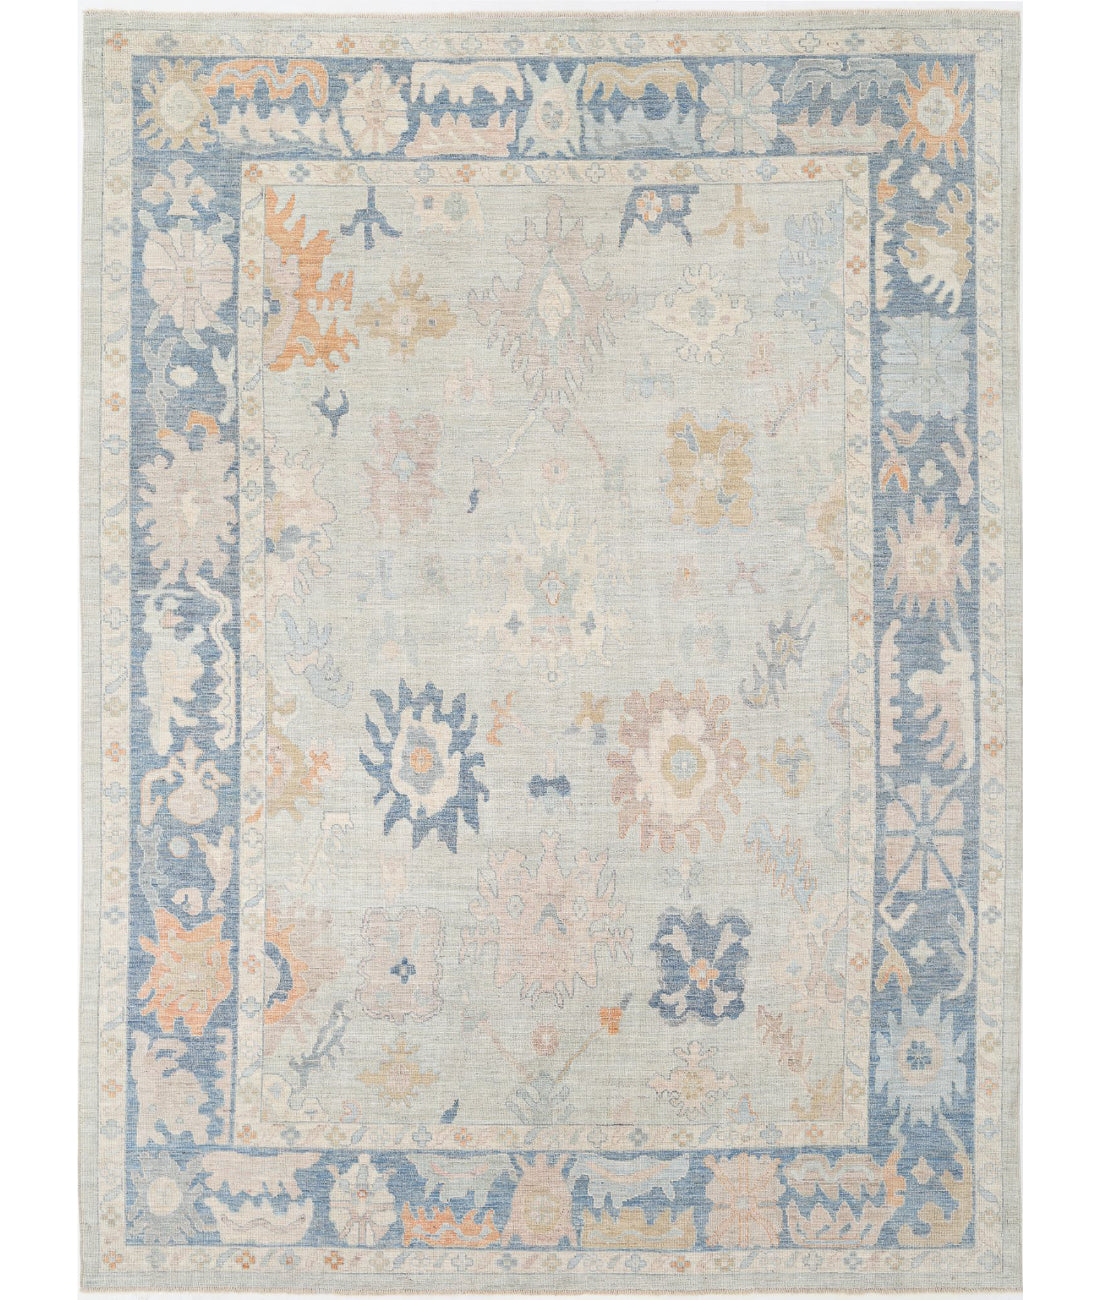 Hand Knotted Oushak Wool Rug - 10'4'' x 14'2'' 10'4'' x 14'2'' (310 X 425) / Blue / Blue